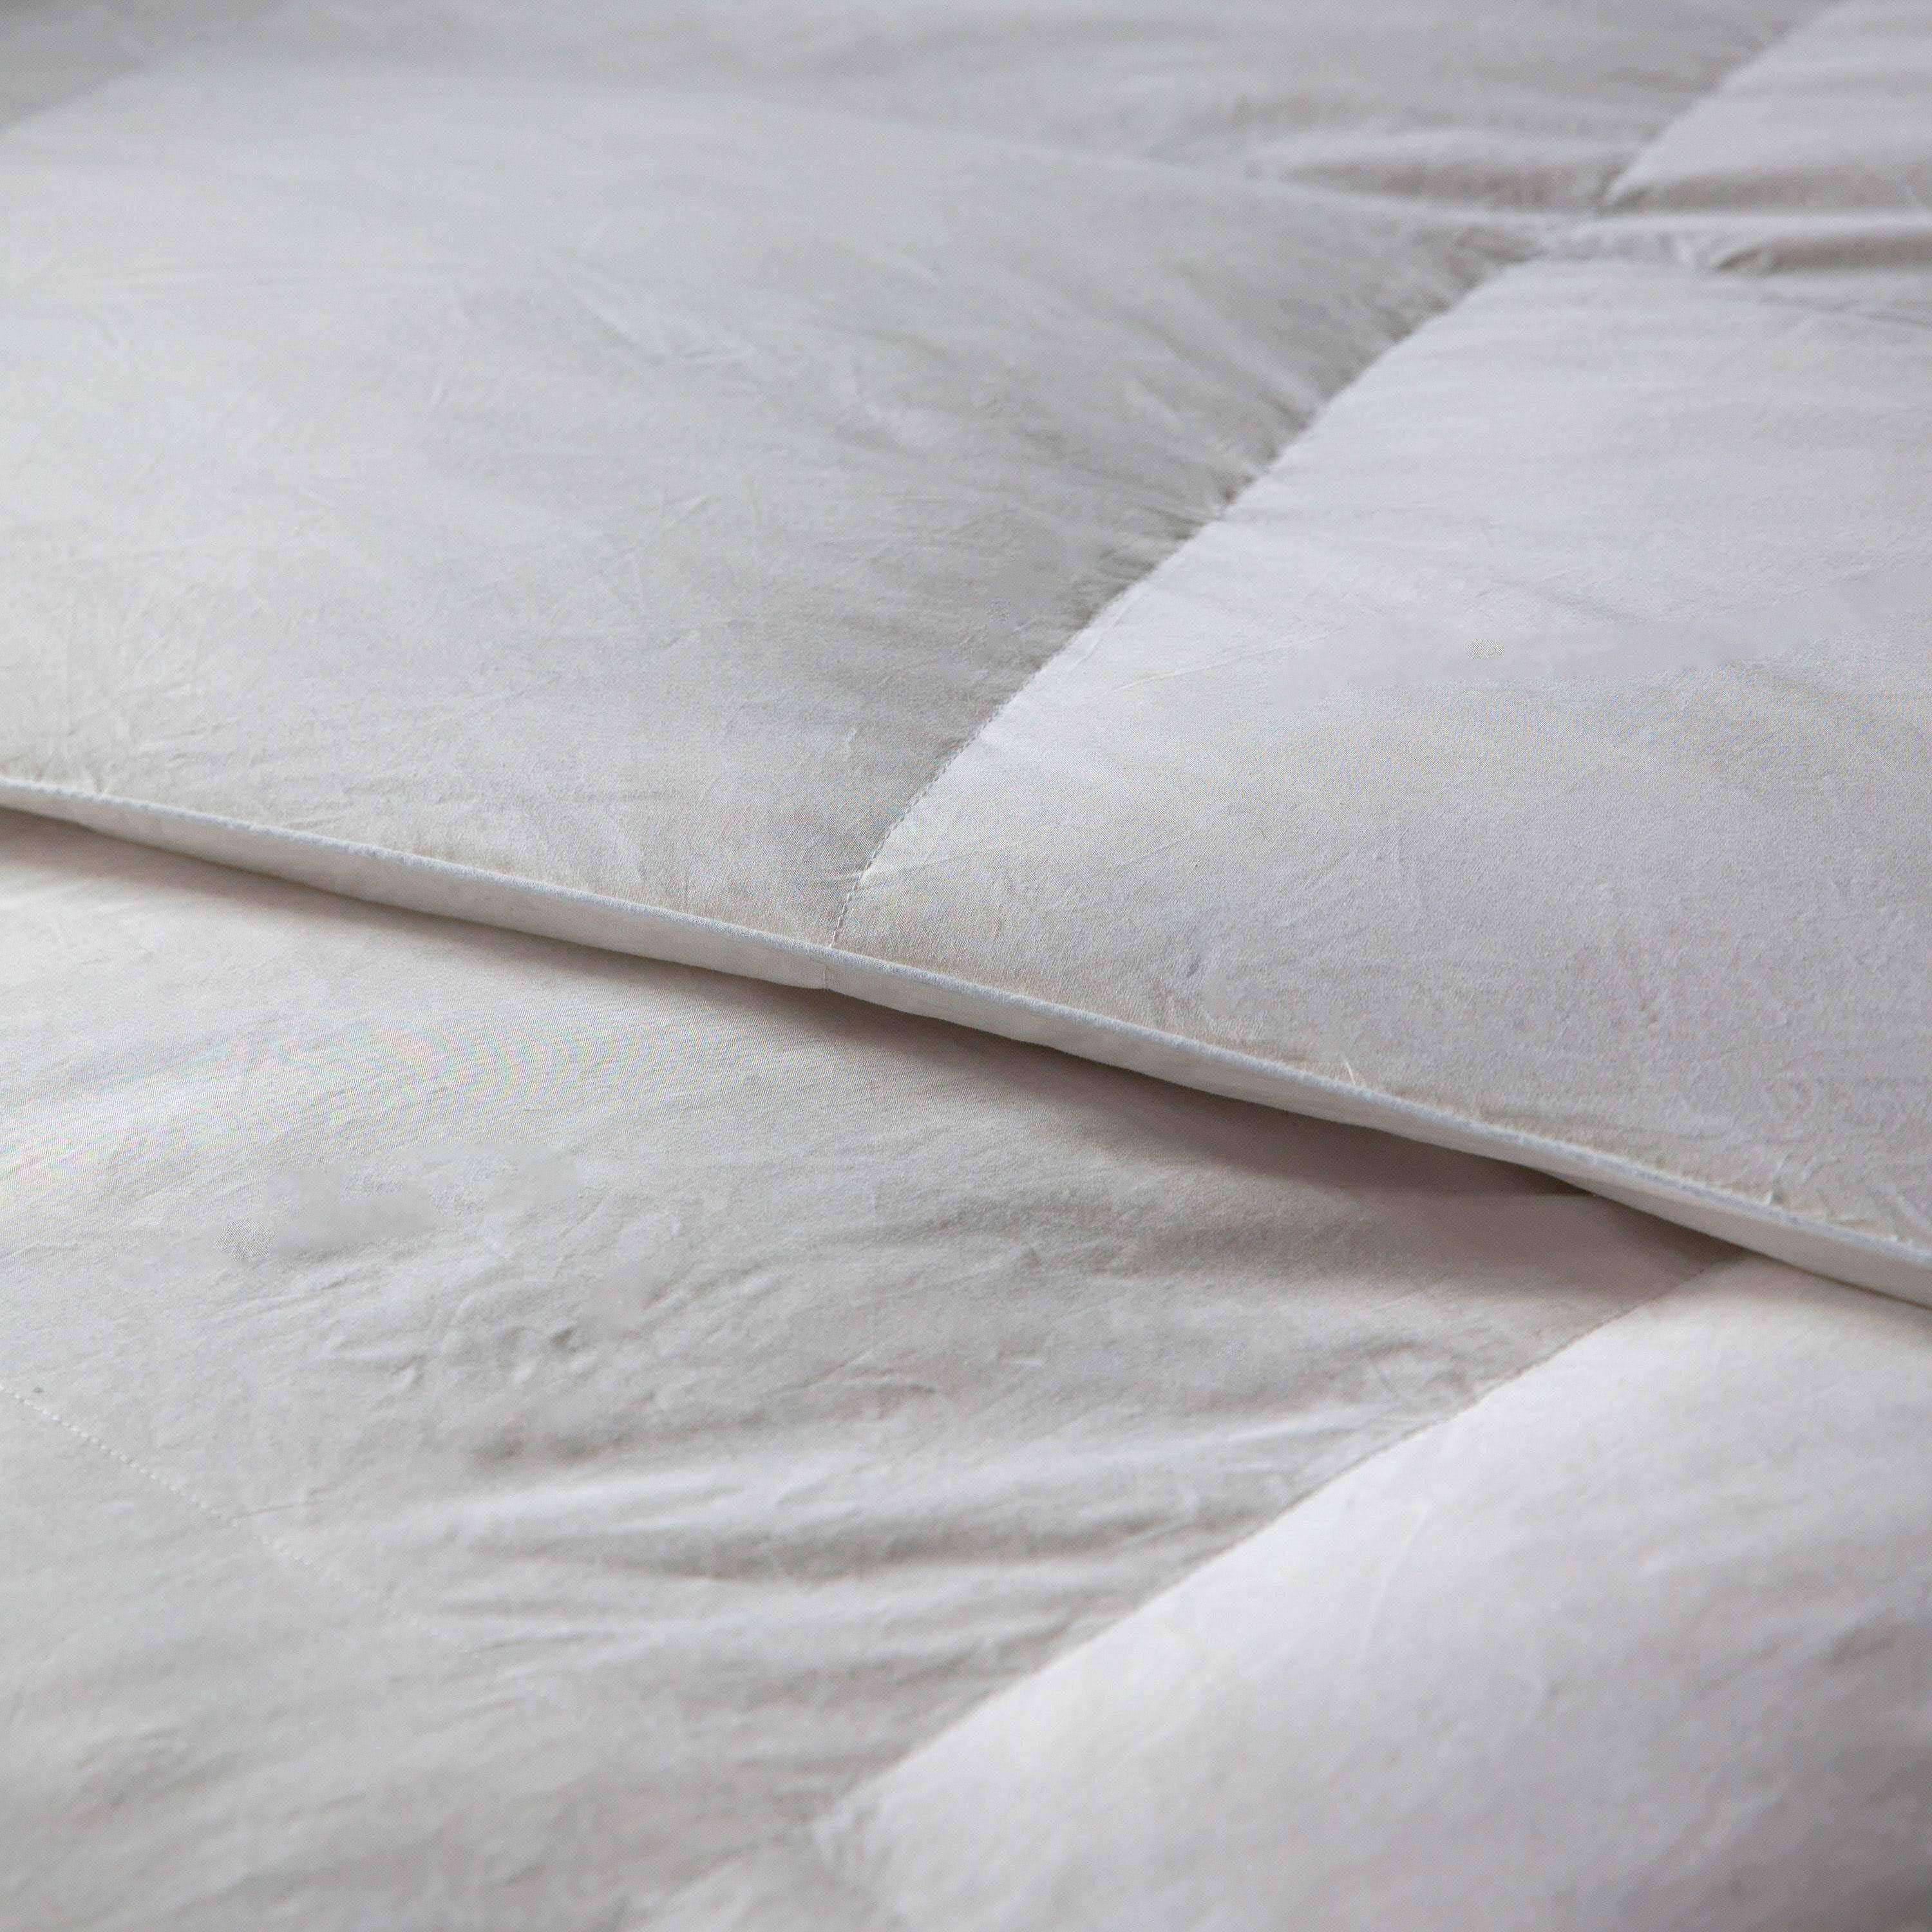 Perfect Sleep - 10.5 tog White Goose Feather and Down Duvet - select size - The Farthing